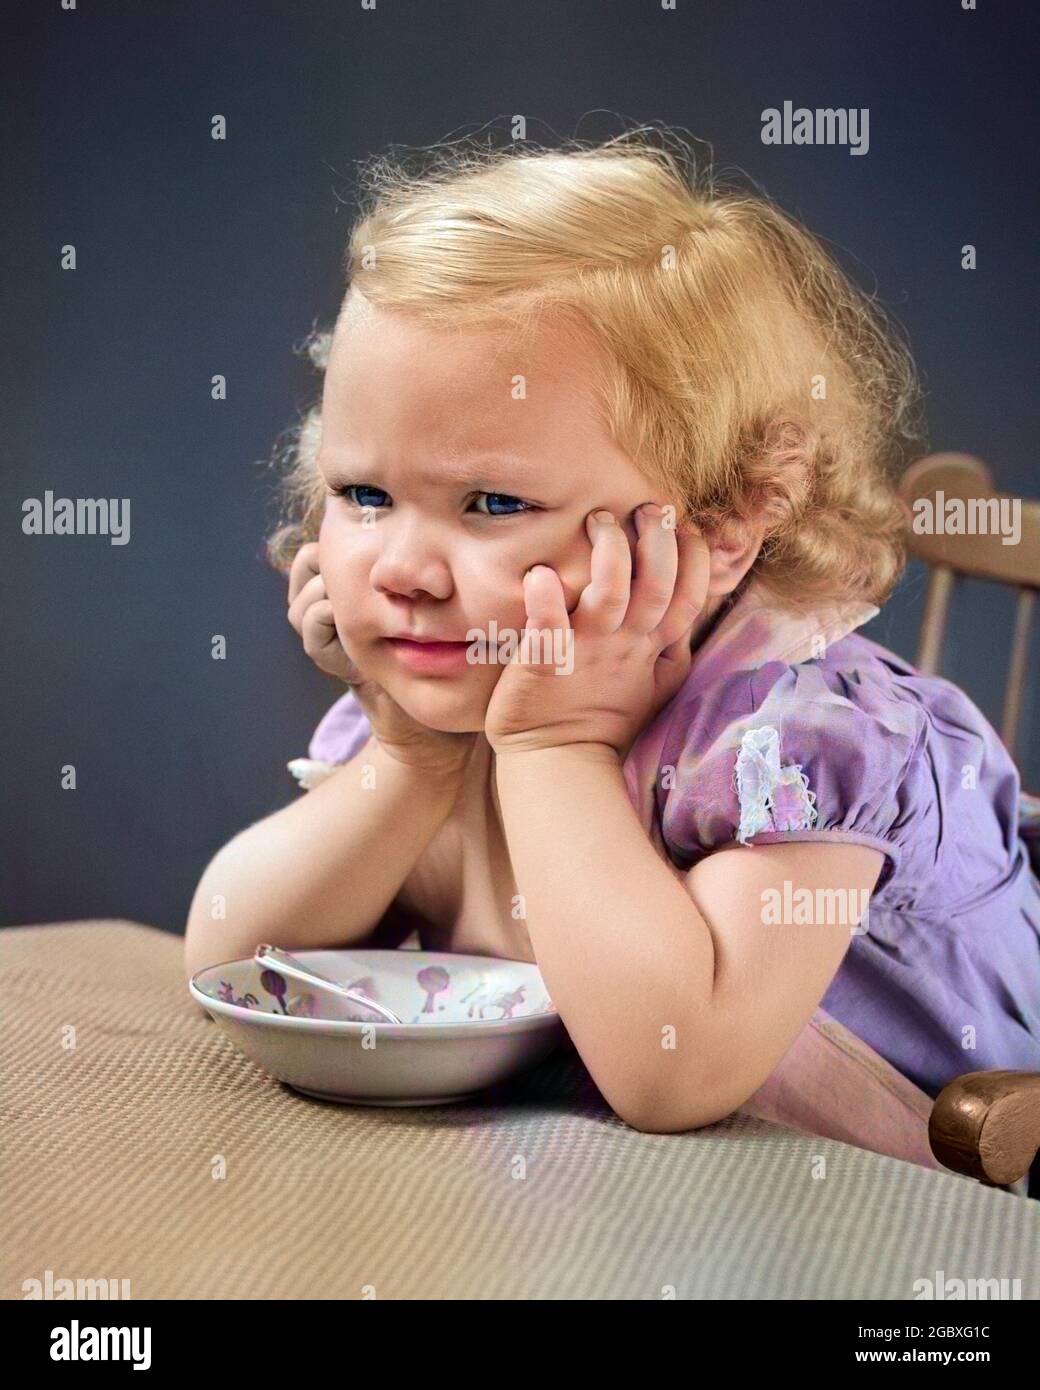 1940s GIRL AT TABLE WITH HEAD CRADLED IN BOTH HANDS FROWN ON HER FACE A CEREAL BOWL AND SPOON BETWEEN HER ELBOWS ON TABLE - f9812c HAR001 HARS WORRY CEREAL GRAIN ANNOYED FEMALES STUDIO SHOT MOODY PORTRAITS COPY SPACE FROWN THOUGHTFUL BOWLS EXPRESSIONS TROUBLED FOODS CONCERNED FROWNING SADNESS THOUGHT HUNGRY HEAD AND SHOULDERS NOURISH BOTH DISTRESSED MANUAL IRATE SHE BETWEEN HUNGER MOOD BREAKFAST FOOD ELBOWS GLUM NOURISHMENT DISPLEASURE HOSTILITY BREAKFAST FOODS CEREAL BOWL CEREAL BOWLS HAS ANNOYANCE CRADLED DISGRUNTLED EMOTION EMOTIONAL GRAINS IRRITATED JUVENILES MISERABLE YOUNGSTER Stock Photo